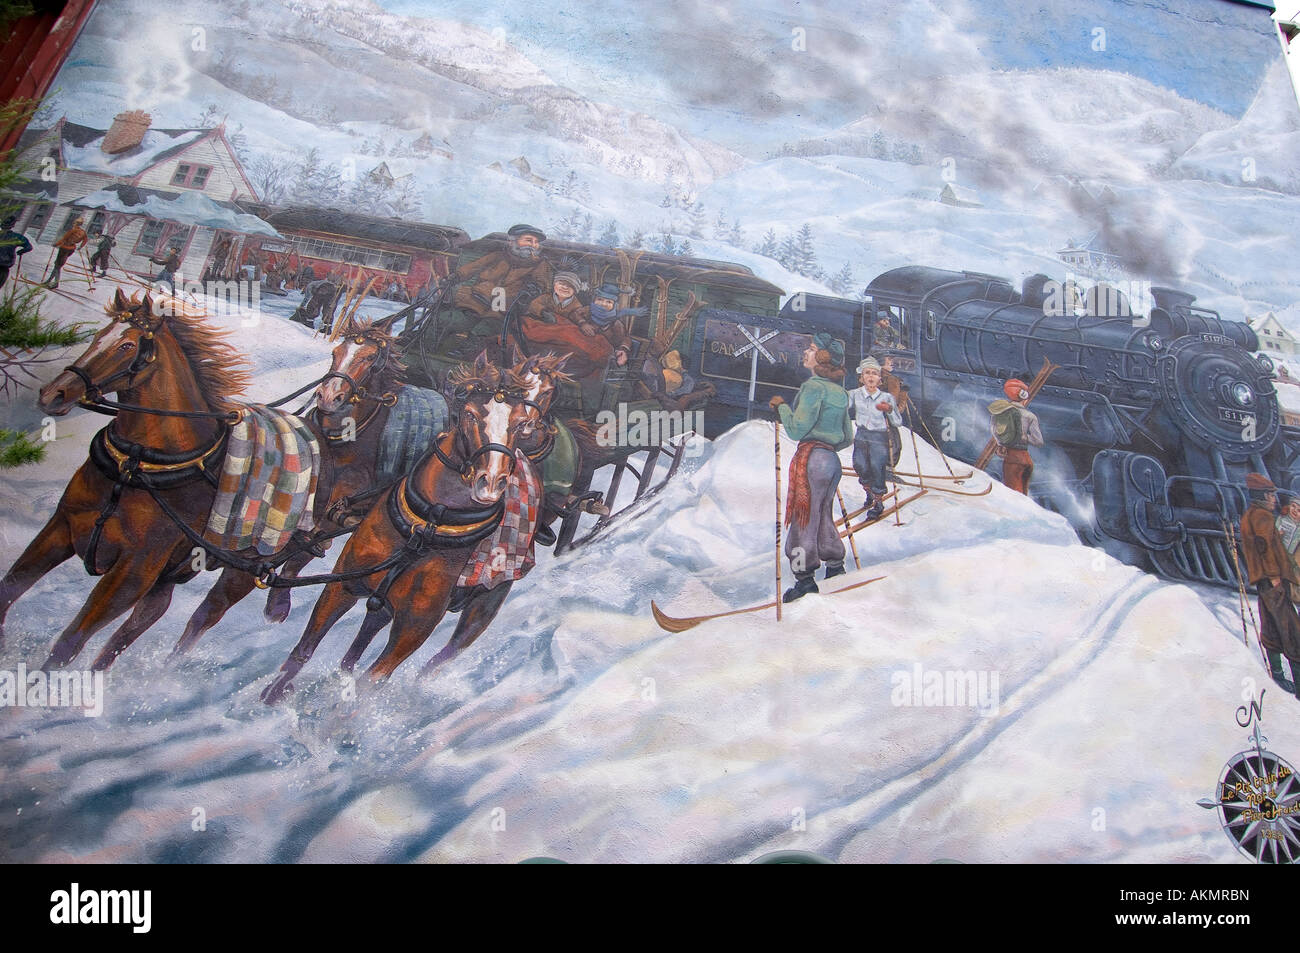 A winter scene painted on the wall of a shop St Jovite Mont Tremblant Laurentians Quebec Canada Stock Photo